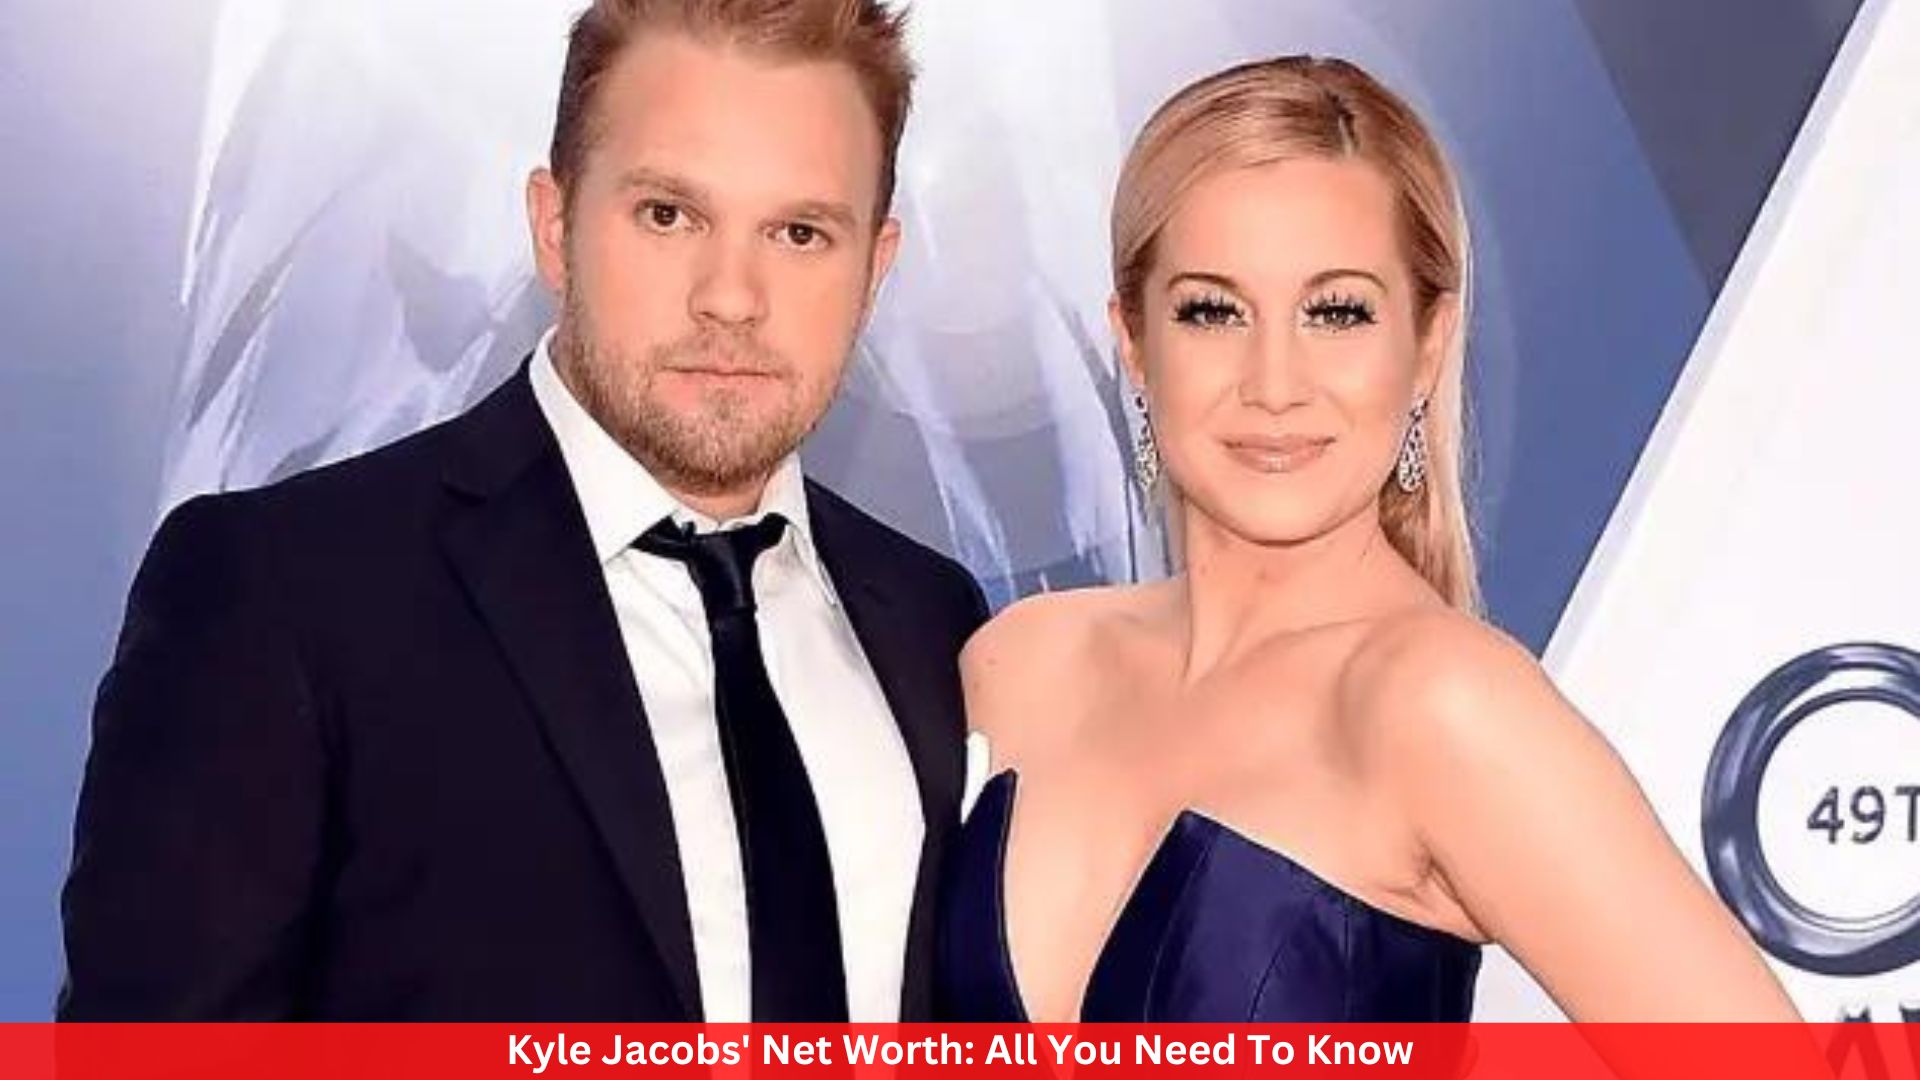 Kyle Jacobs' Net Worth: All You Need To Know